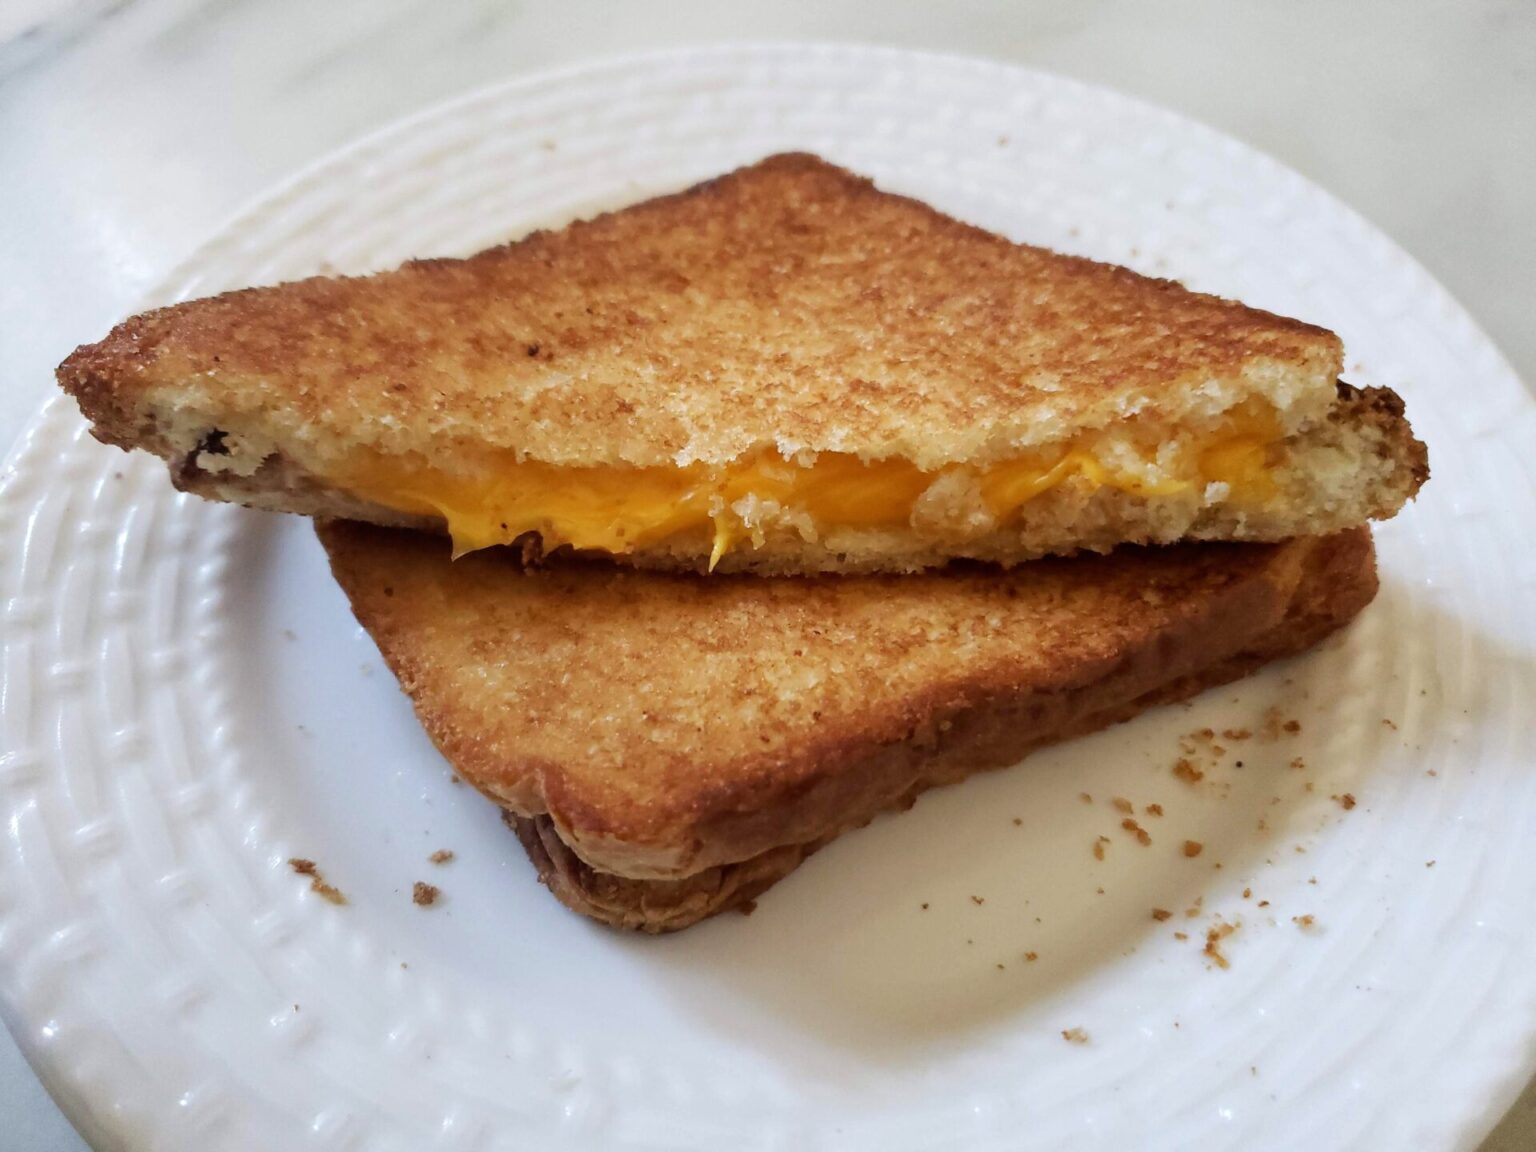 Costco Grilled Cheese Sandwich - Is It Worth It?